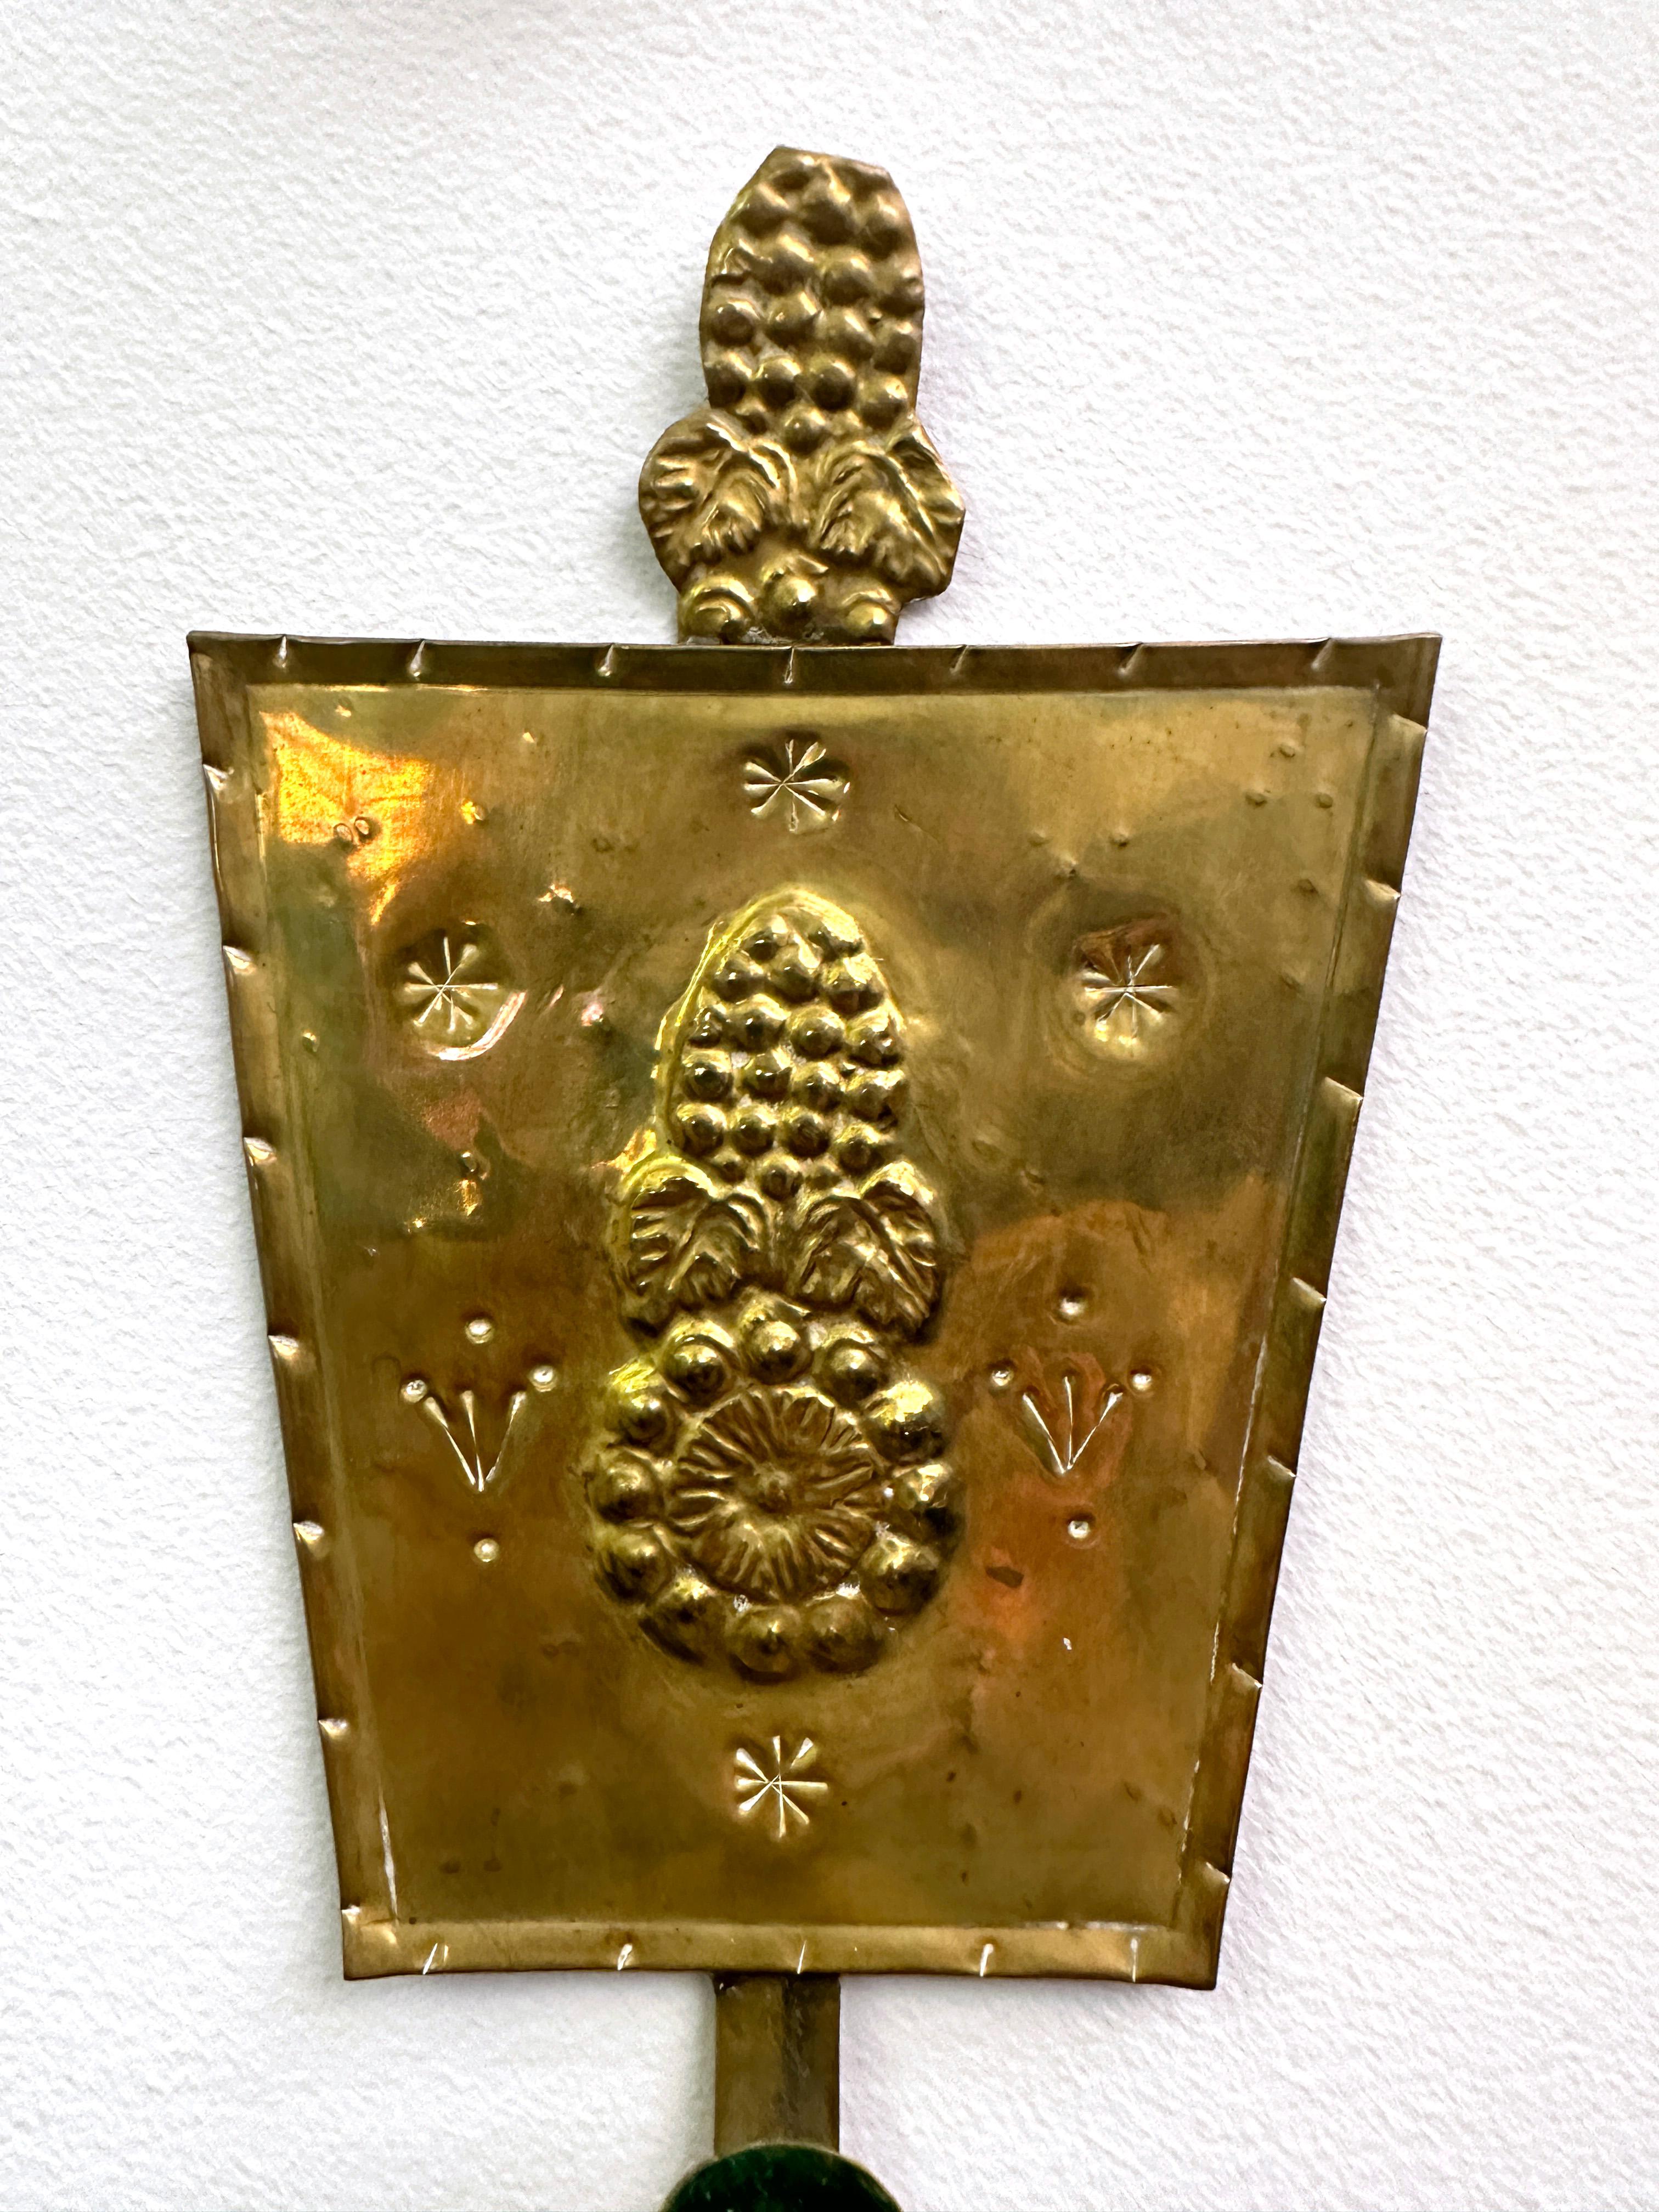 Pair of Swedish Arts & Crafts brass repoussé wall candle sconces. Circa the early 20th Century. Of a trapezoid form with top crown added section. The repoussé is decorated with main oval flower shape, surrounded by smaller carved details. Each